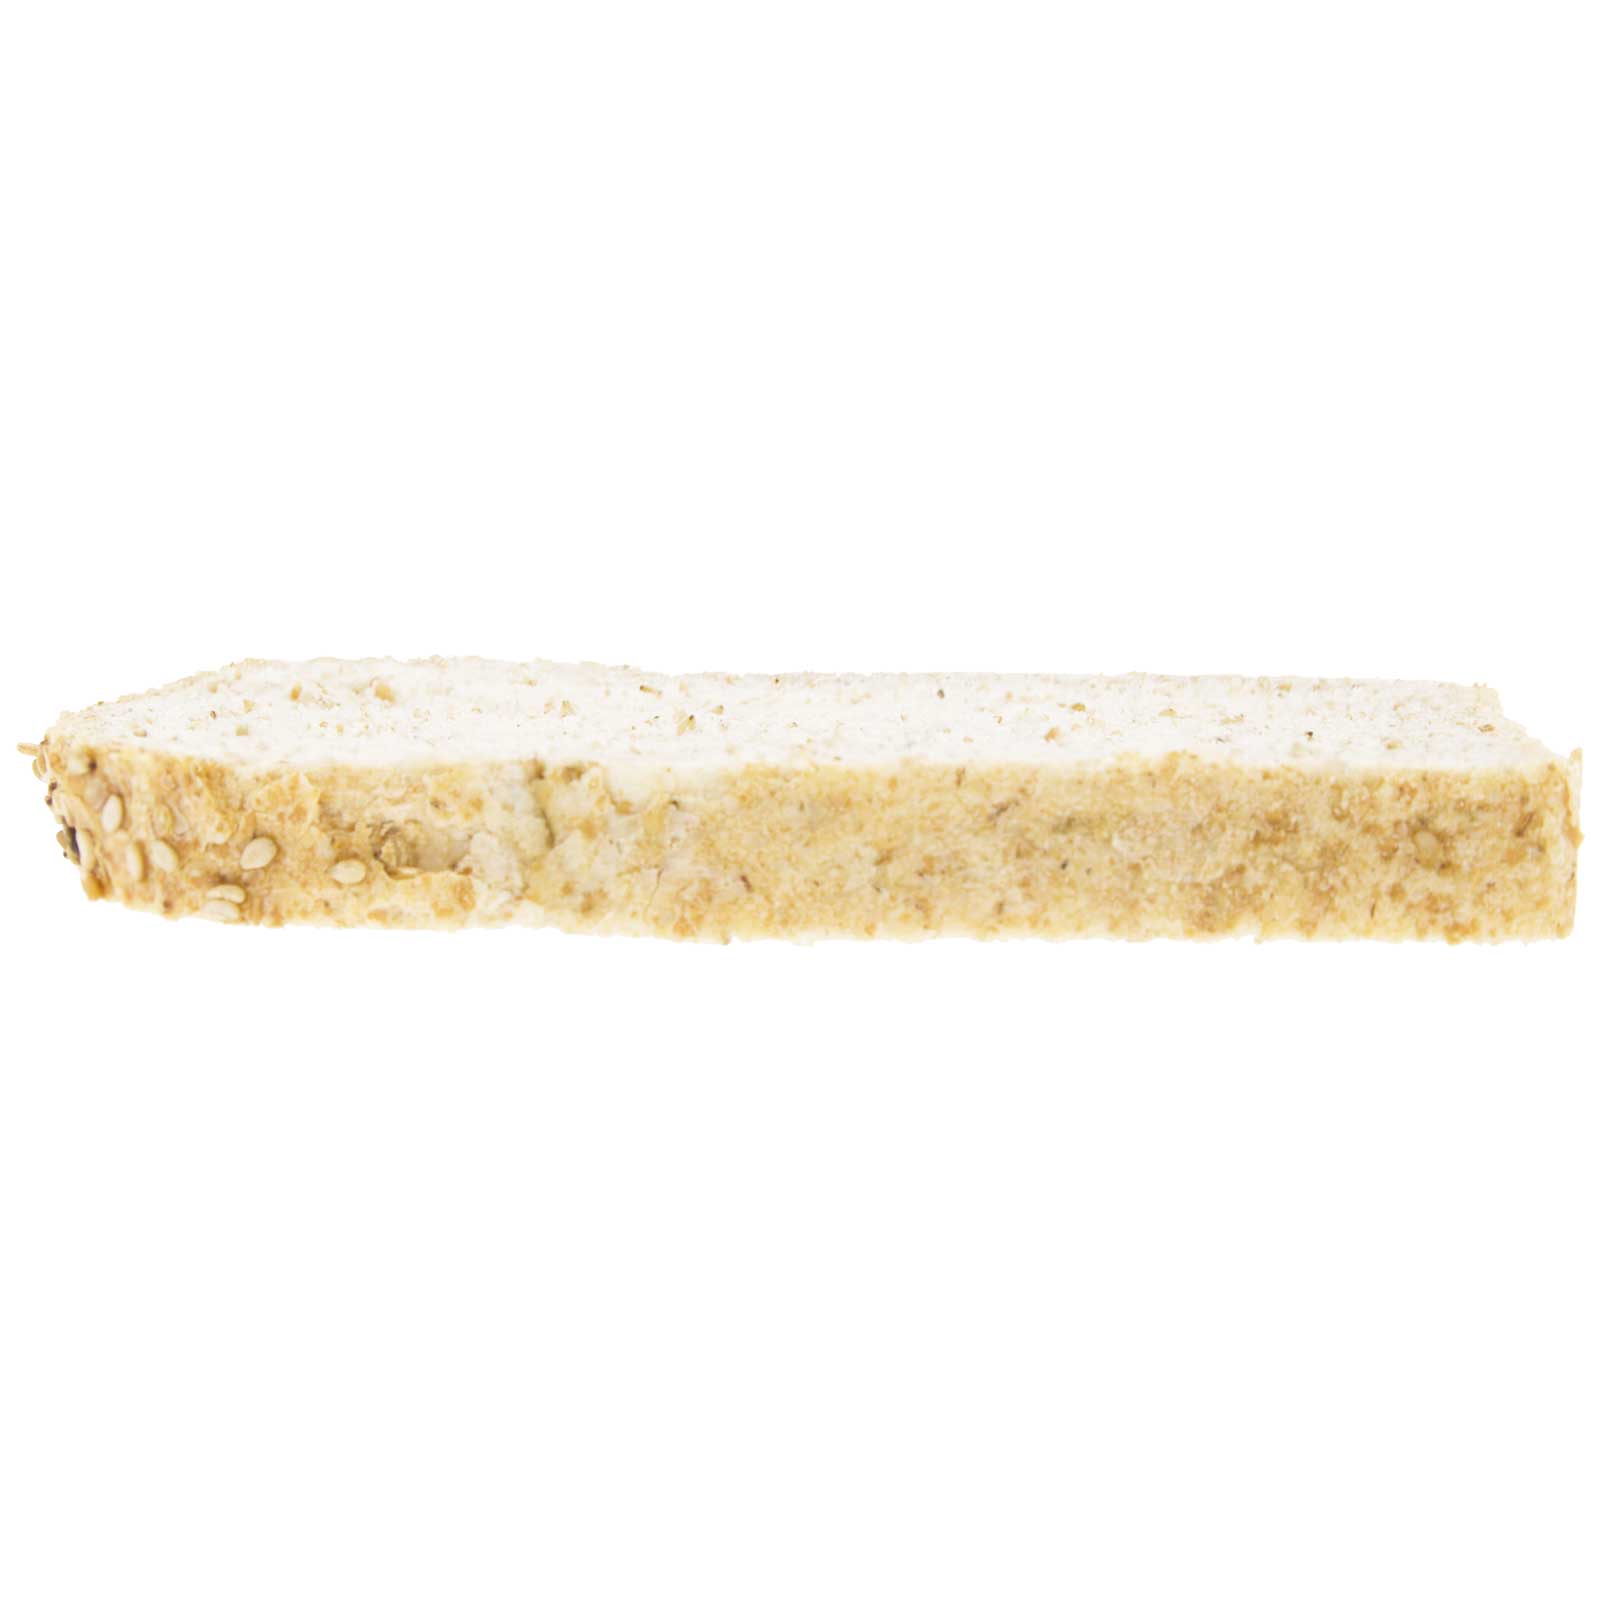 Wheat mold bread with sesame 450g ecological gourmet